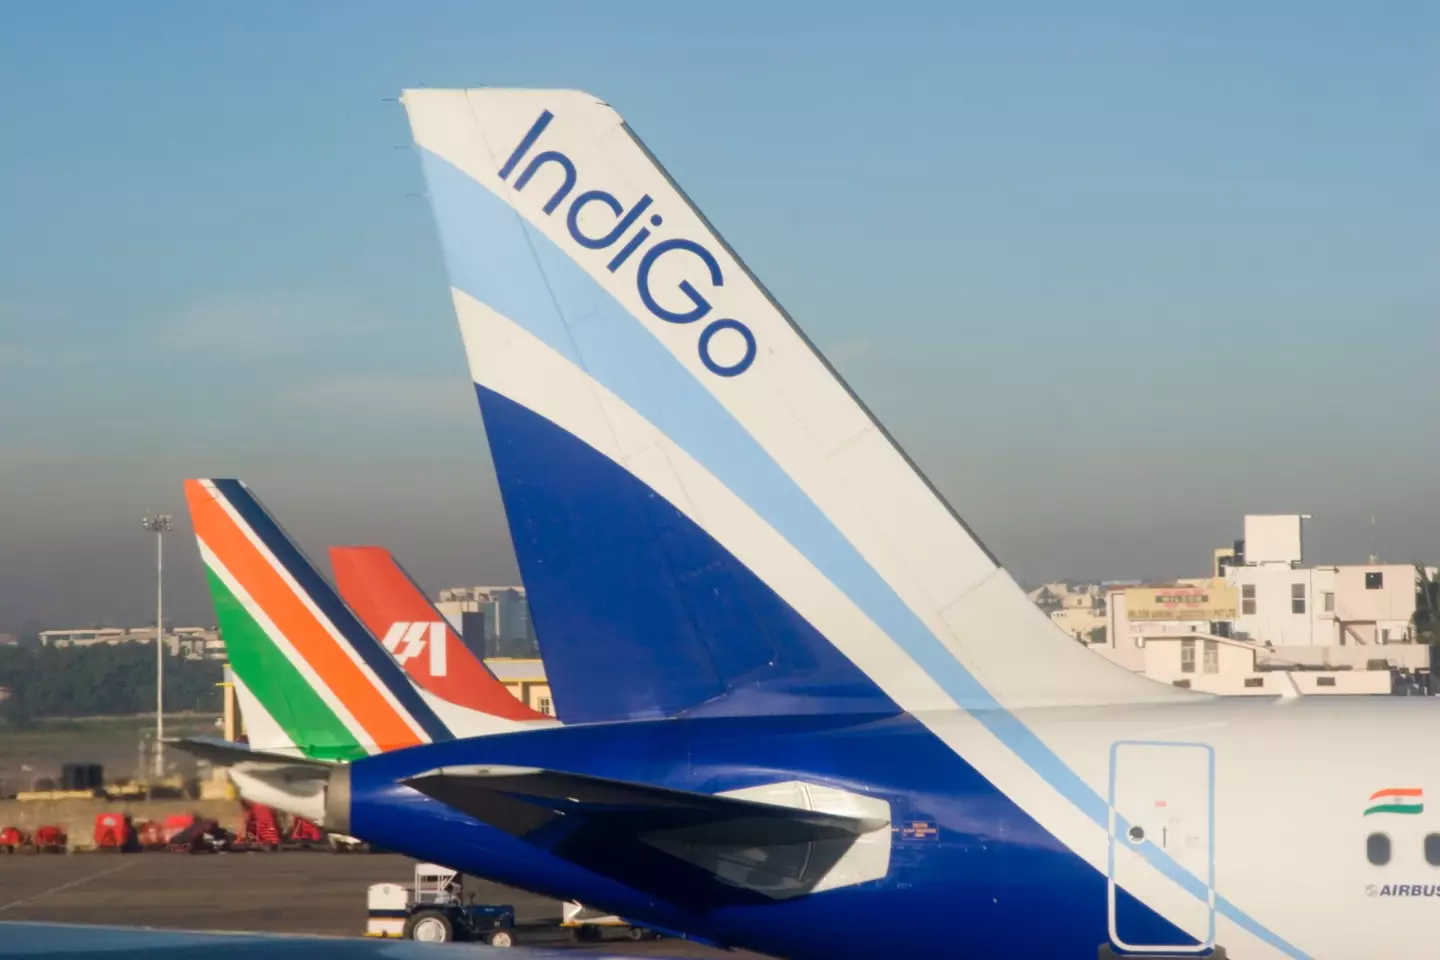 The man was trying to board an IndiGo flight when he made the hoax call.